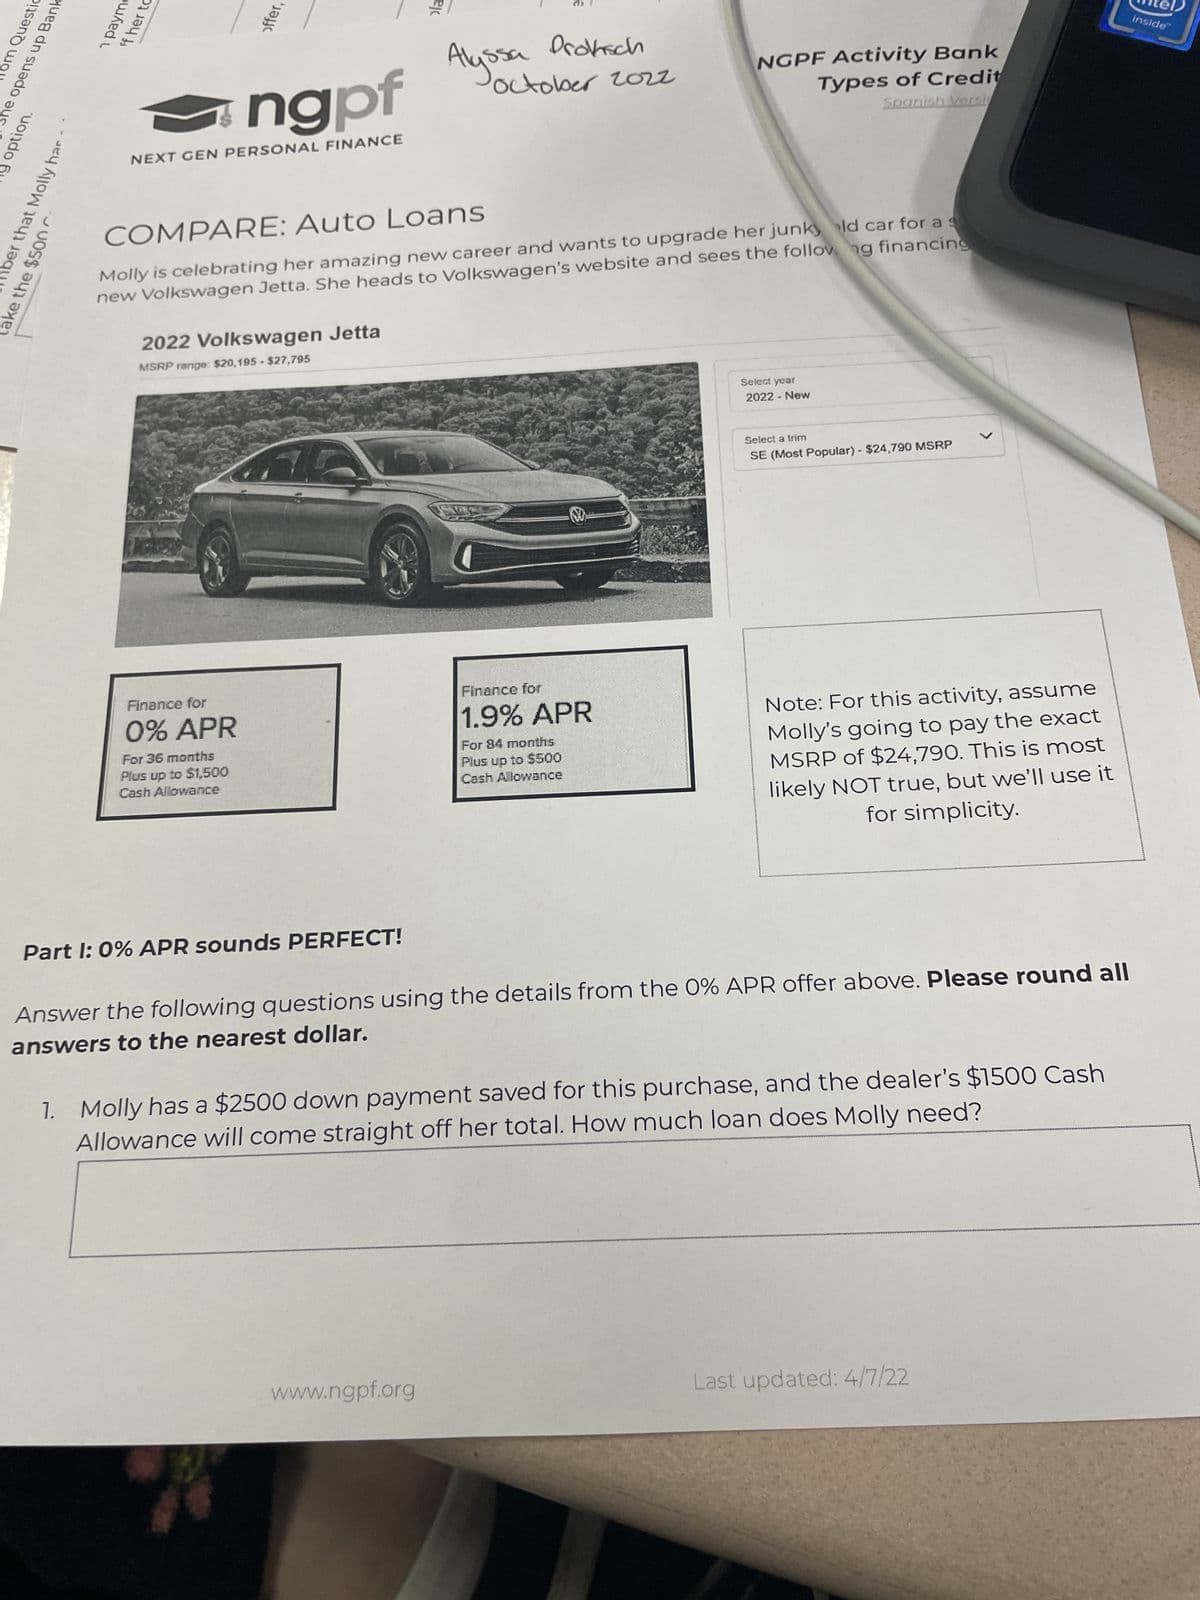 llom Questio
She opens up Bank
y option.
take the $500
hber that Molly har
1 payme
ff her to
ngpf
NEXT GEN PERSONAL FINANCE
offer,
2022 Volkswagen Jetta
MSRP range: $20,195 - $27,795
Finance for
0% APR
For 36 months
Plus up to $1,500
Cash Allowance
G
COMPARE:
Auto Loans
Molly is celebrating her amazing new career and wants to upgrade her junky ld car for a s
new Volkswagen Jetta. She heads to Volkswagen's website and sees the following financing
Part 1: 0% APR sounds PERFECT!
ola
Alys
Proksch
www.ngpf.org
October 202z
ssa
83
Finance for
1.9% APR
For 84 months
Plus up to $500
Cash Allowance
NGPF Activity Bank
Types of Credit
Spanish Versi
Select year
2022 - New
Select a trim
SE (Most Popular) - $24,790 MSRP
Note: For this activity, assume
Molly's going to pay the exact
MSRP of $24,790. This is most
likely NOT true, but we'll use it
for simplicity.
Answer the following questions using the details from the 0% APR offer above. Please round all
answers to the nearest dollar.
1. Molly has a $2500 down payment saved for this purchase, and the dealer's $1500 Cash
Allowance will come straight off her total. How much loan does Molly need?
Last updated: 4/7/22
inside